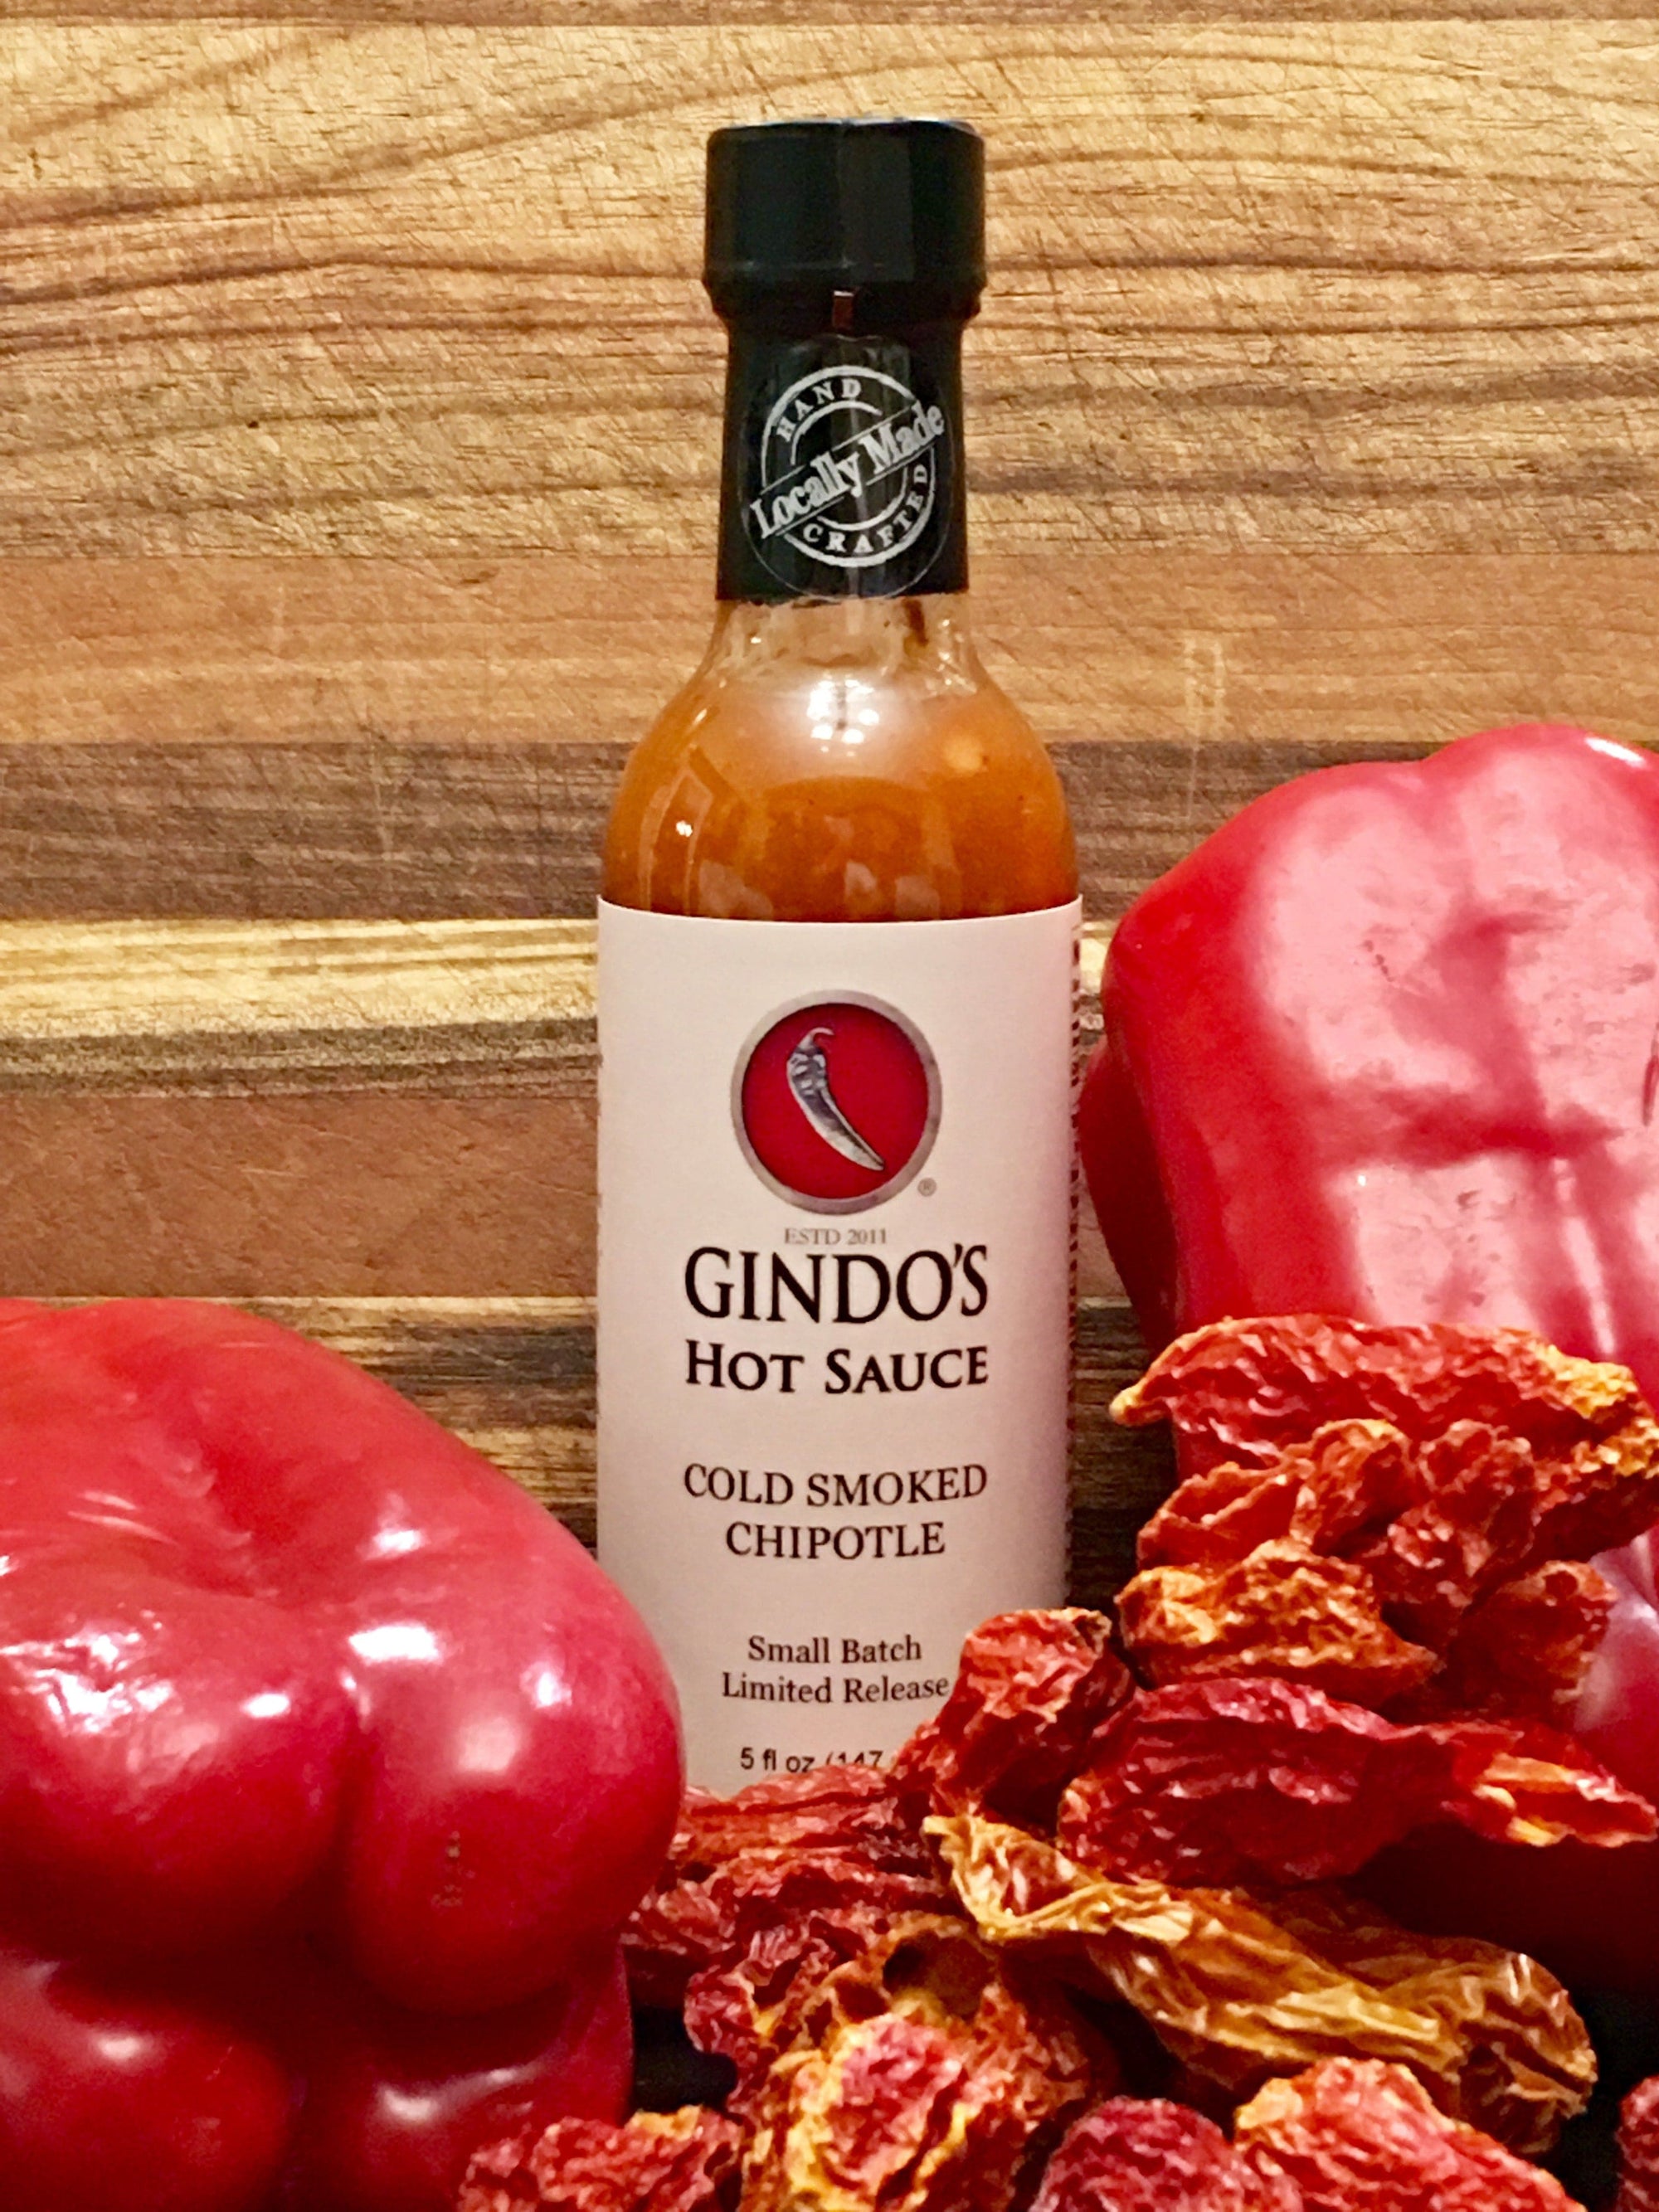 Gindo's Cold Smoked Chipotle Craft Hot Sauce